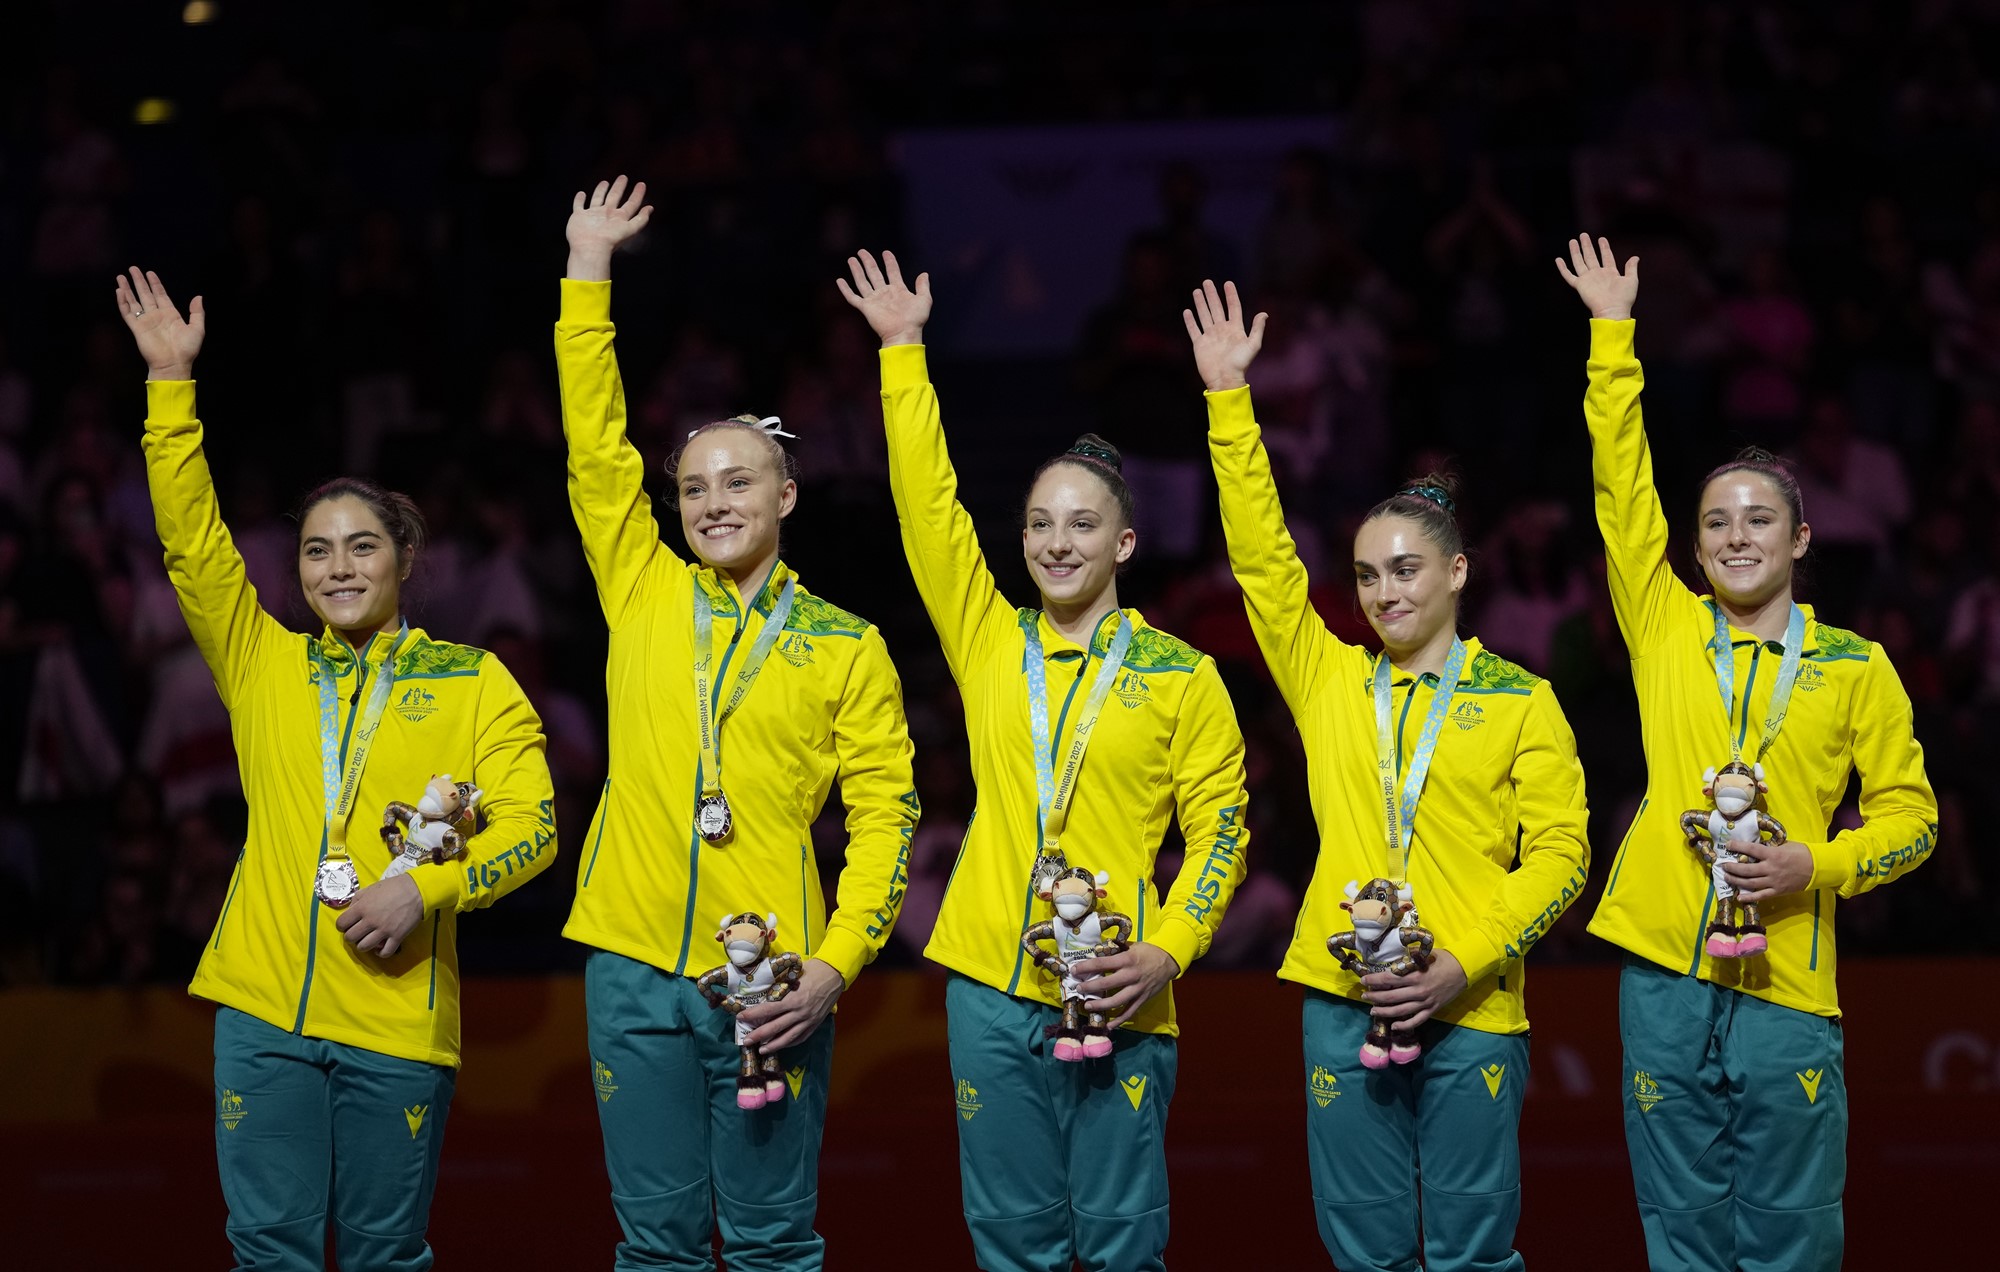 five members of the australian womens gymnastics team pose with medals on a podium smiling and waving